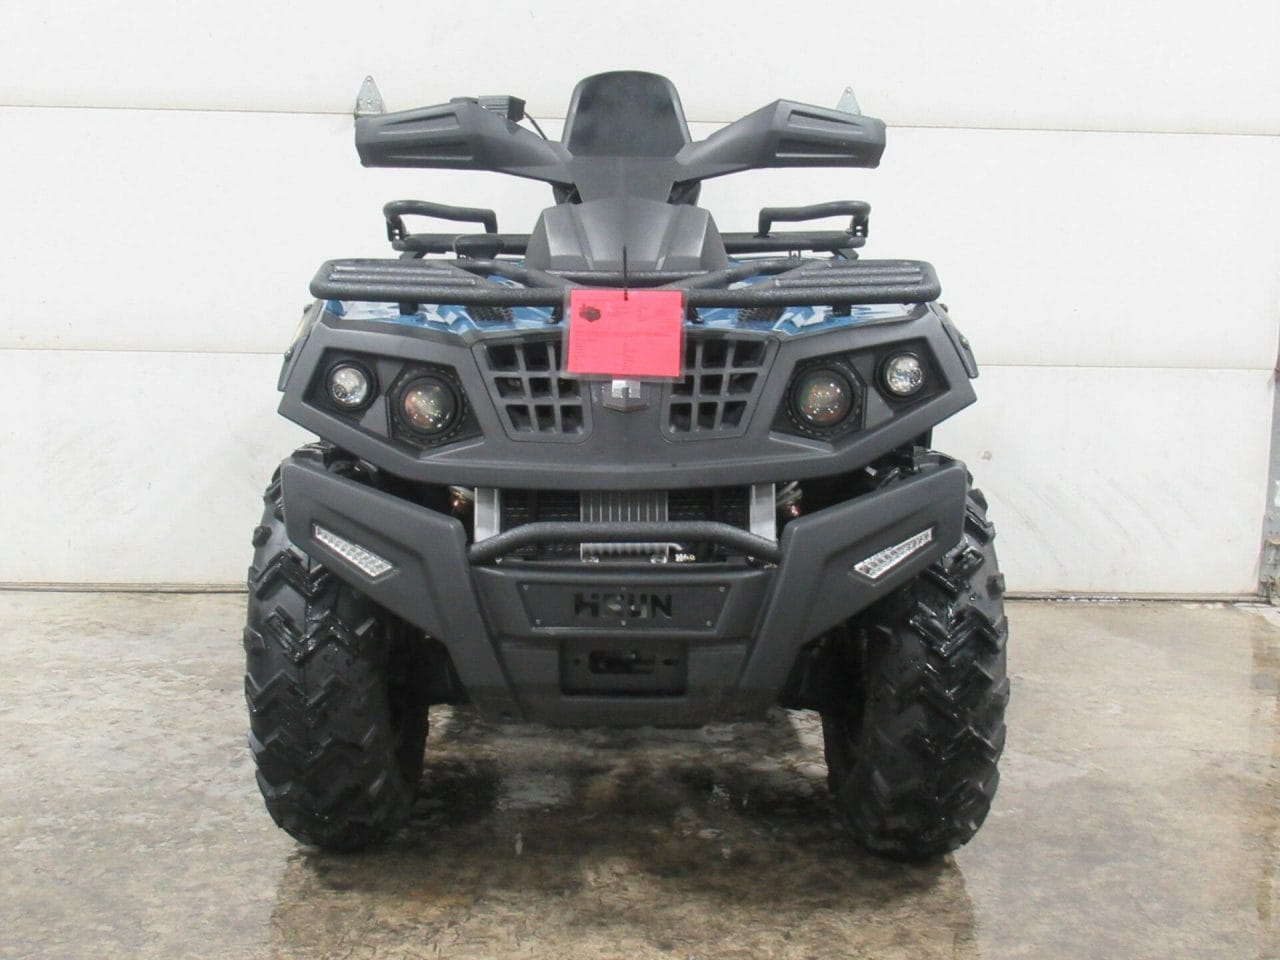 2022 Hisun Tactic 400 2-up 4×4 * New * Come with 2 Year Warranty’s *